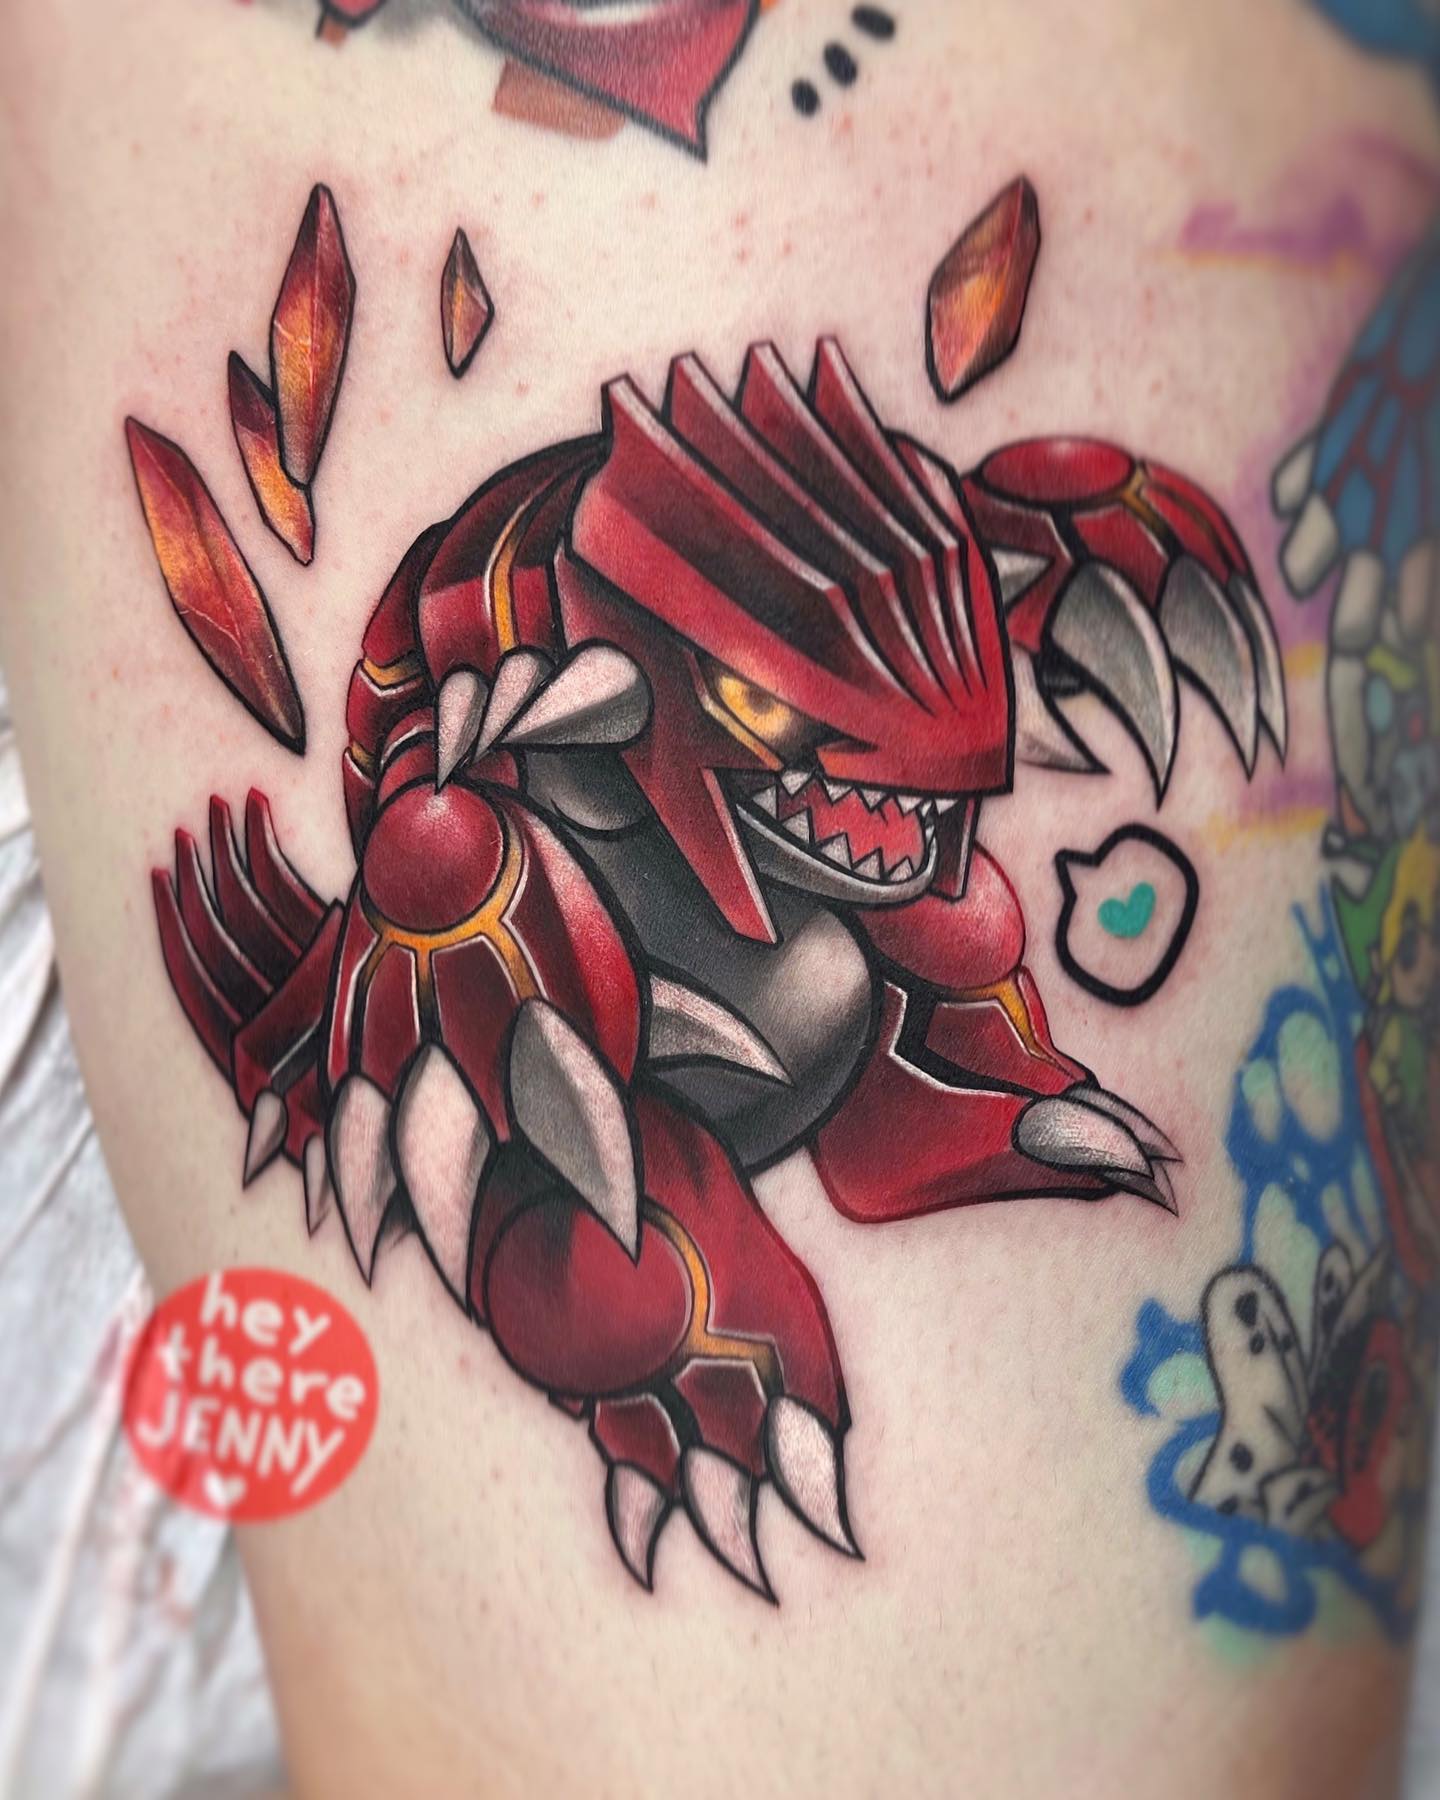 Groudon is a fire-type legendary Pokemon. It is the final evolved form of Charizard, and it is capable of learning the most powerful fire-type moves. With the tattoo, you will feel Groudon to the fullest since it looks so real.